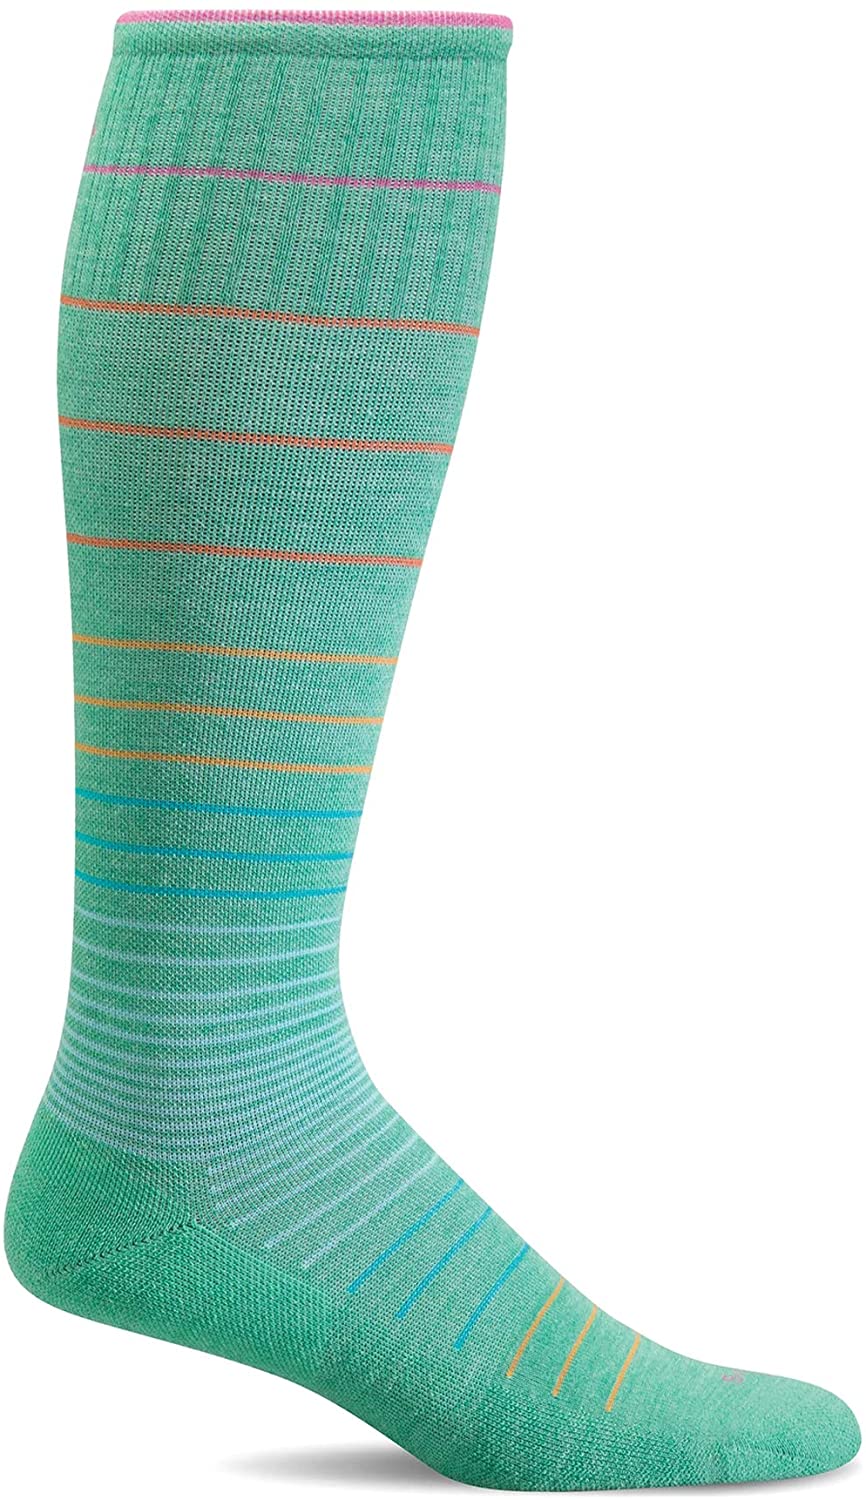 Sockwell Women's Circulator Moderate Graduated Compression Sock in Spearmint from the side